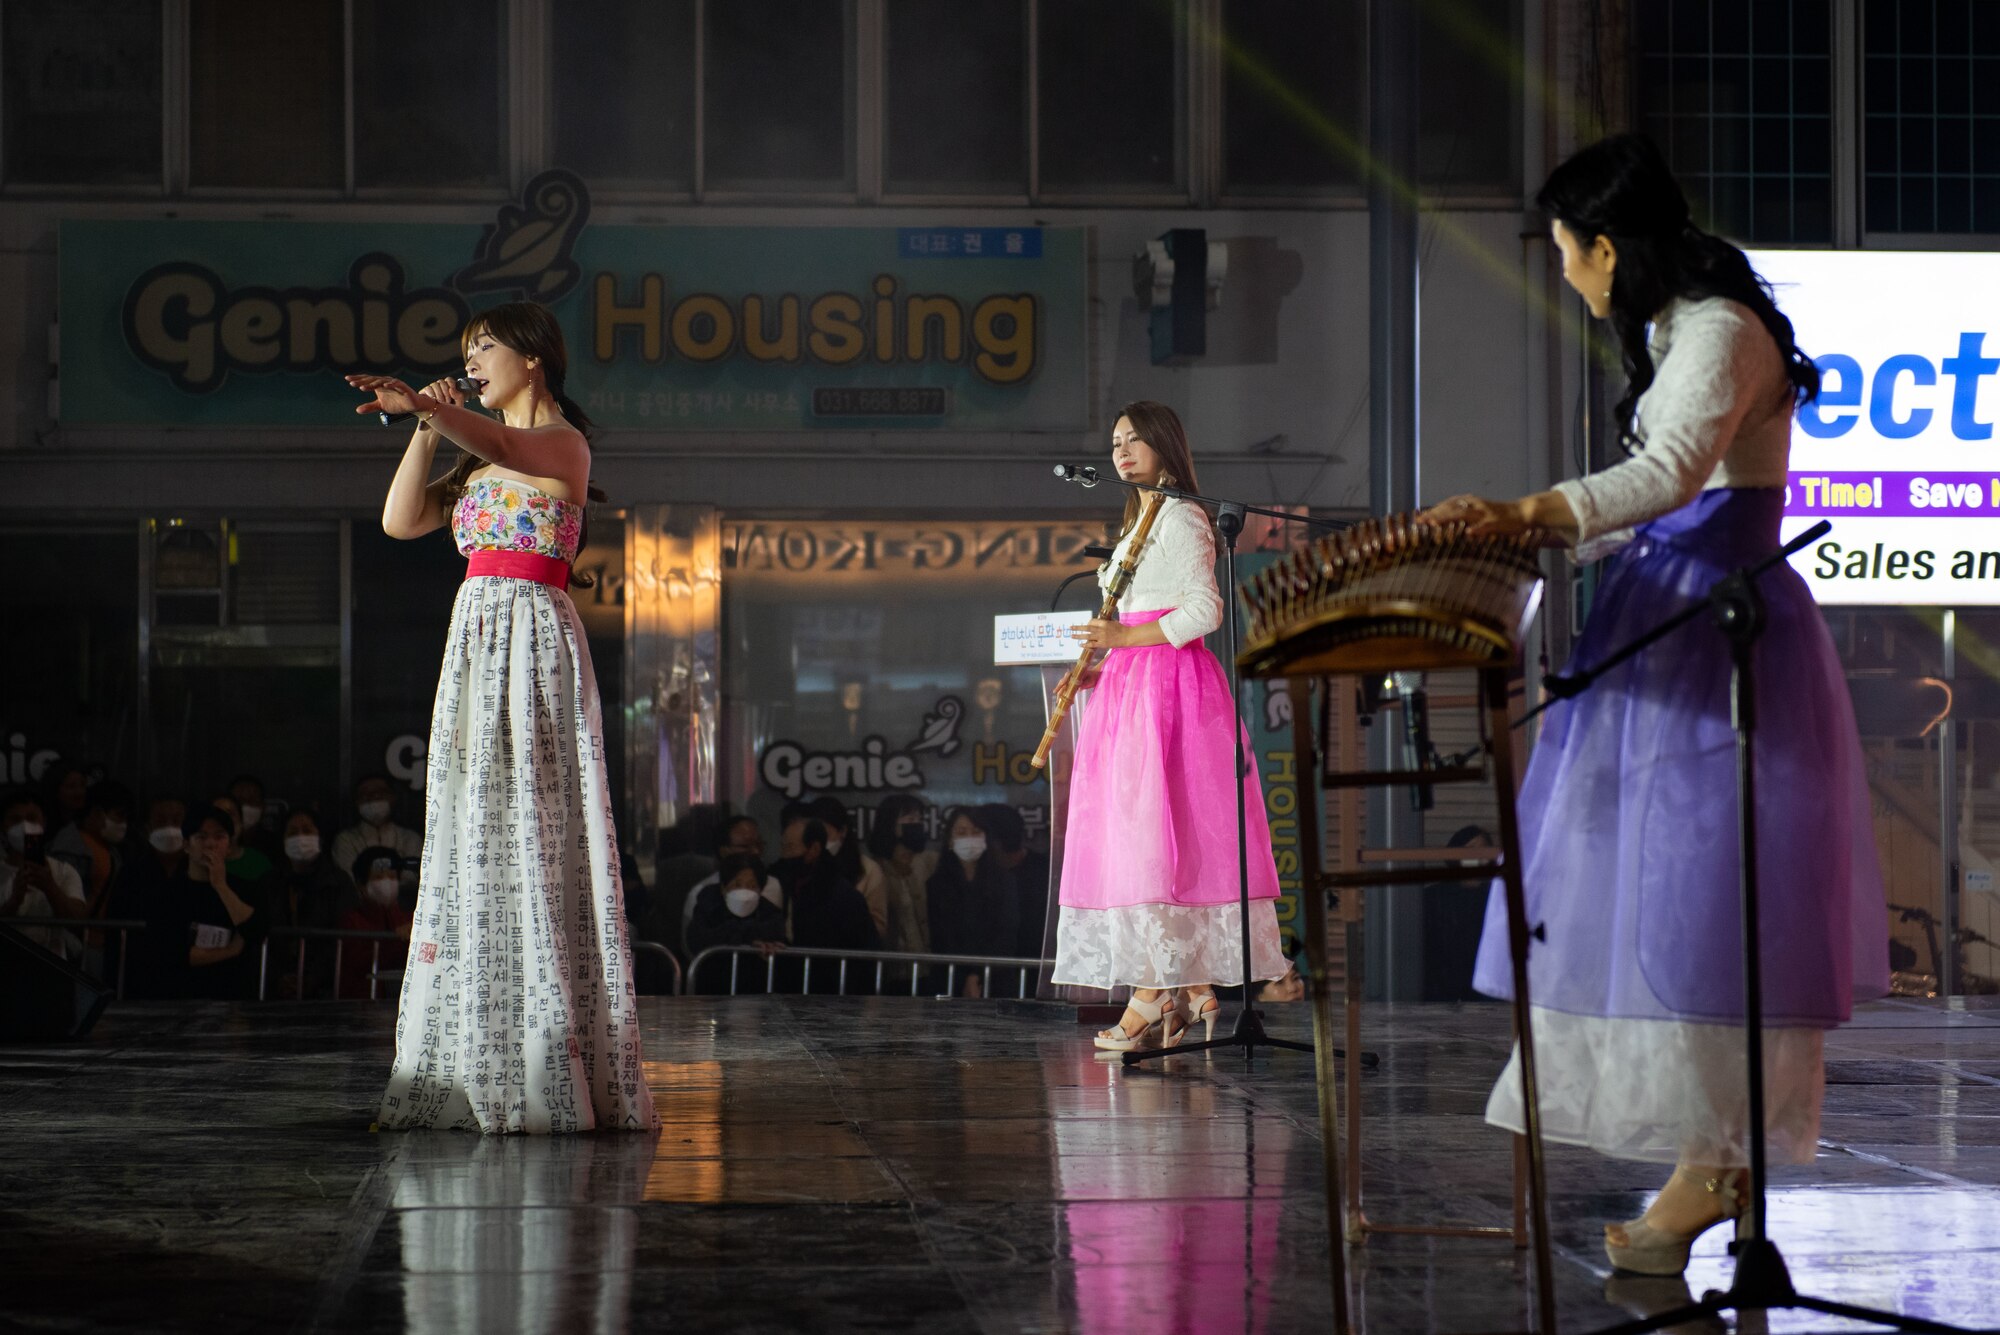 Musical group “Lucid” performs a fusion of modern and classic Korean music during the 19th Republic of Korea and the United States Cultural Festival, in front of Osan Air Base, Republic of Korea, Oct. 8, 2022.